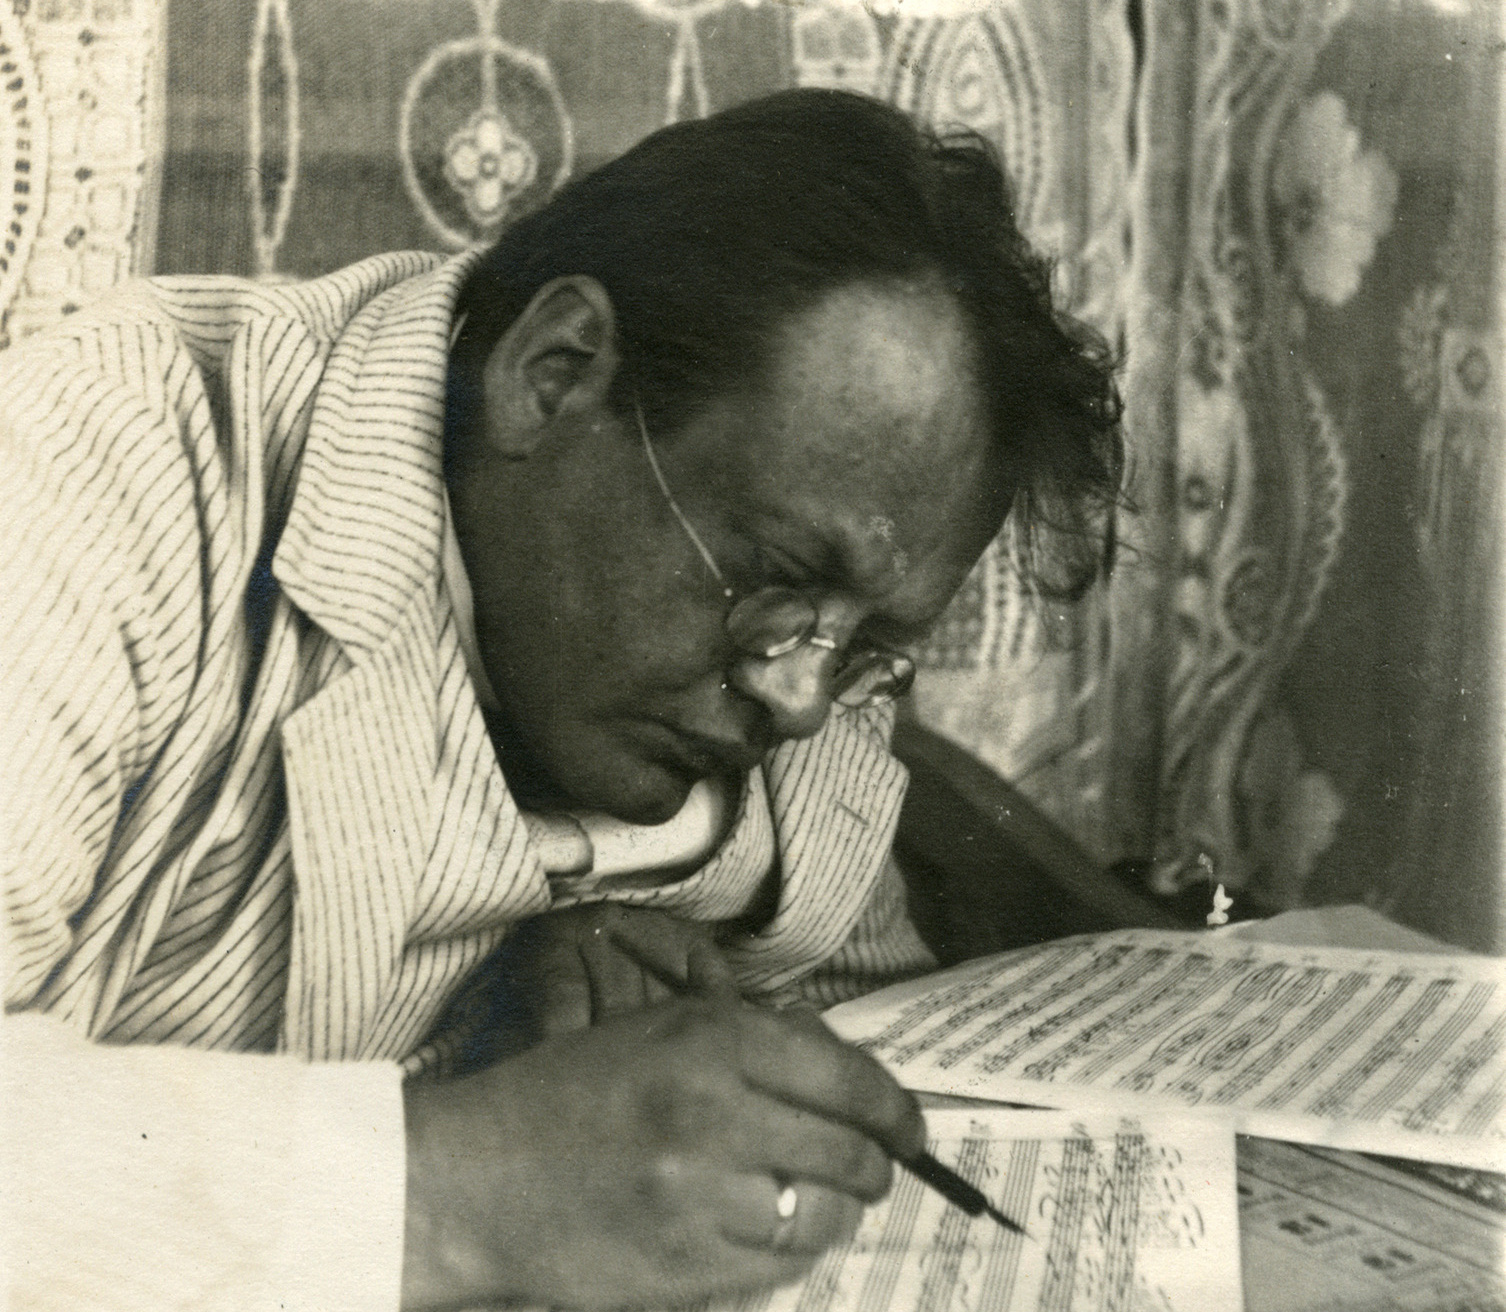 On an old black and white photo we see the composer Max Reger sitting at a table, bending over some sheets of music and holding the dip pen in his hand.